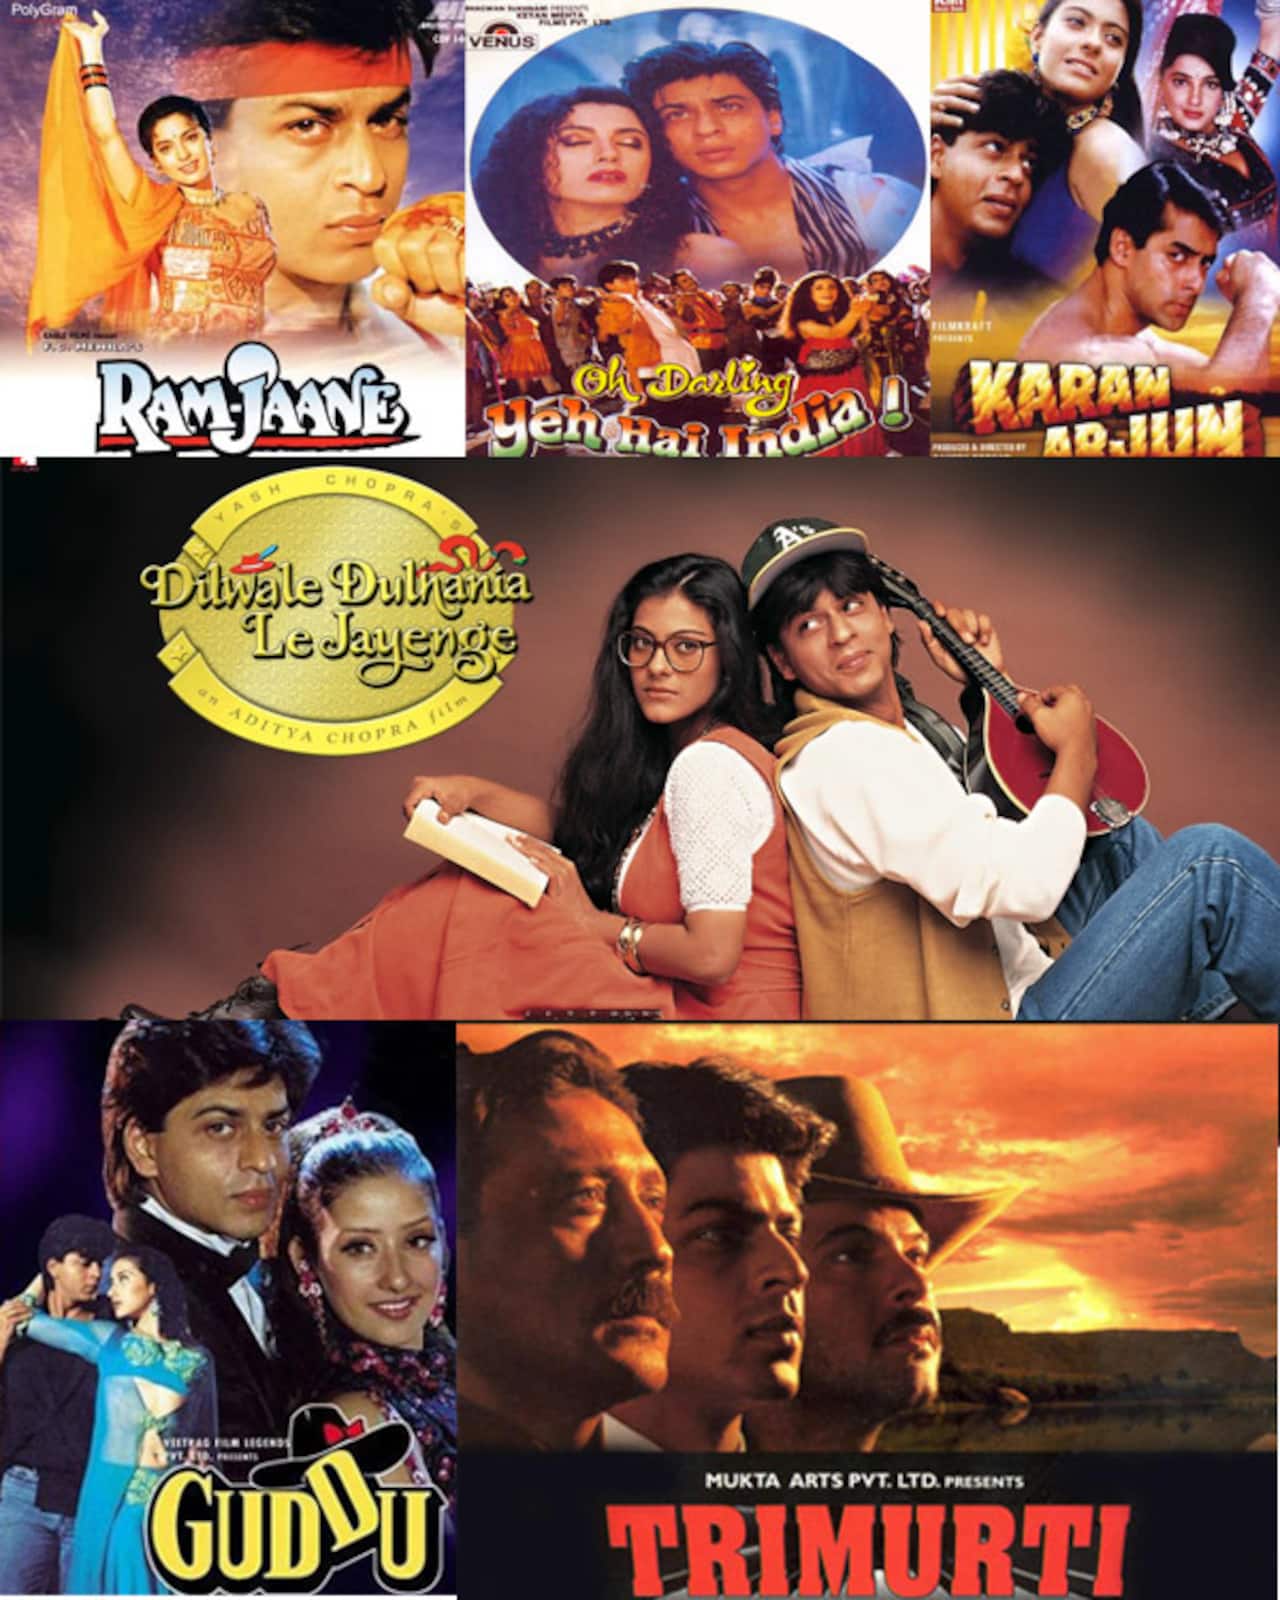 #21YearsofDDLJ: 6 other Shah Rukh Khan releases from 1995 that were overshadowed by DDLJ